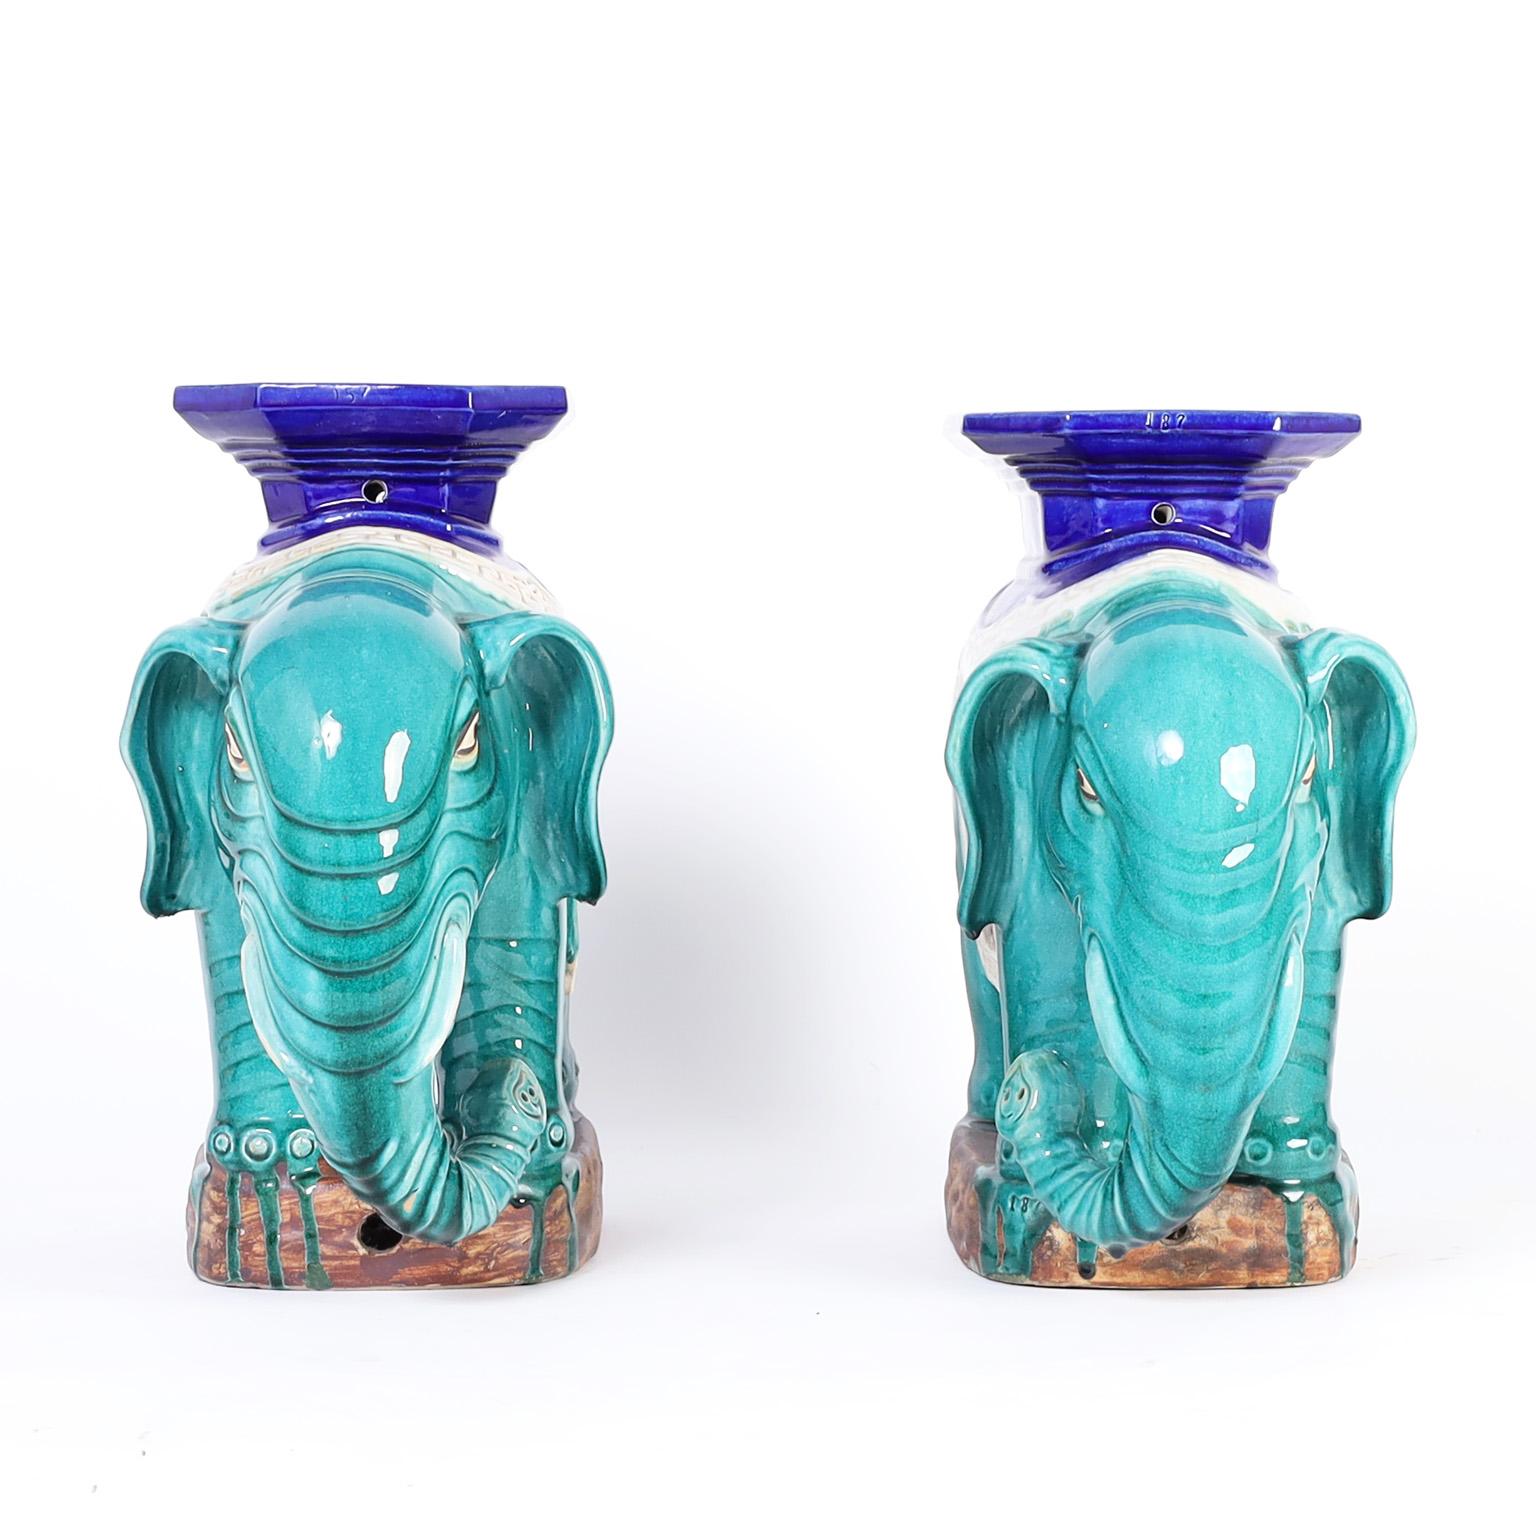 Mid-century Chinese elephant seats or stools crafted in terra cotta, and decorated with a drip glaze technique in striking traditional colors.